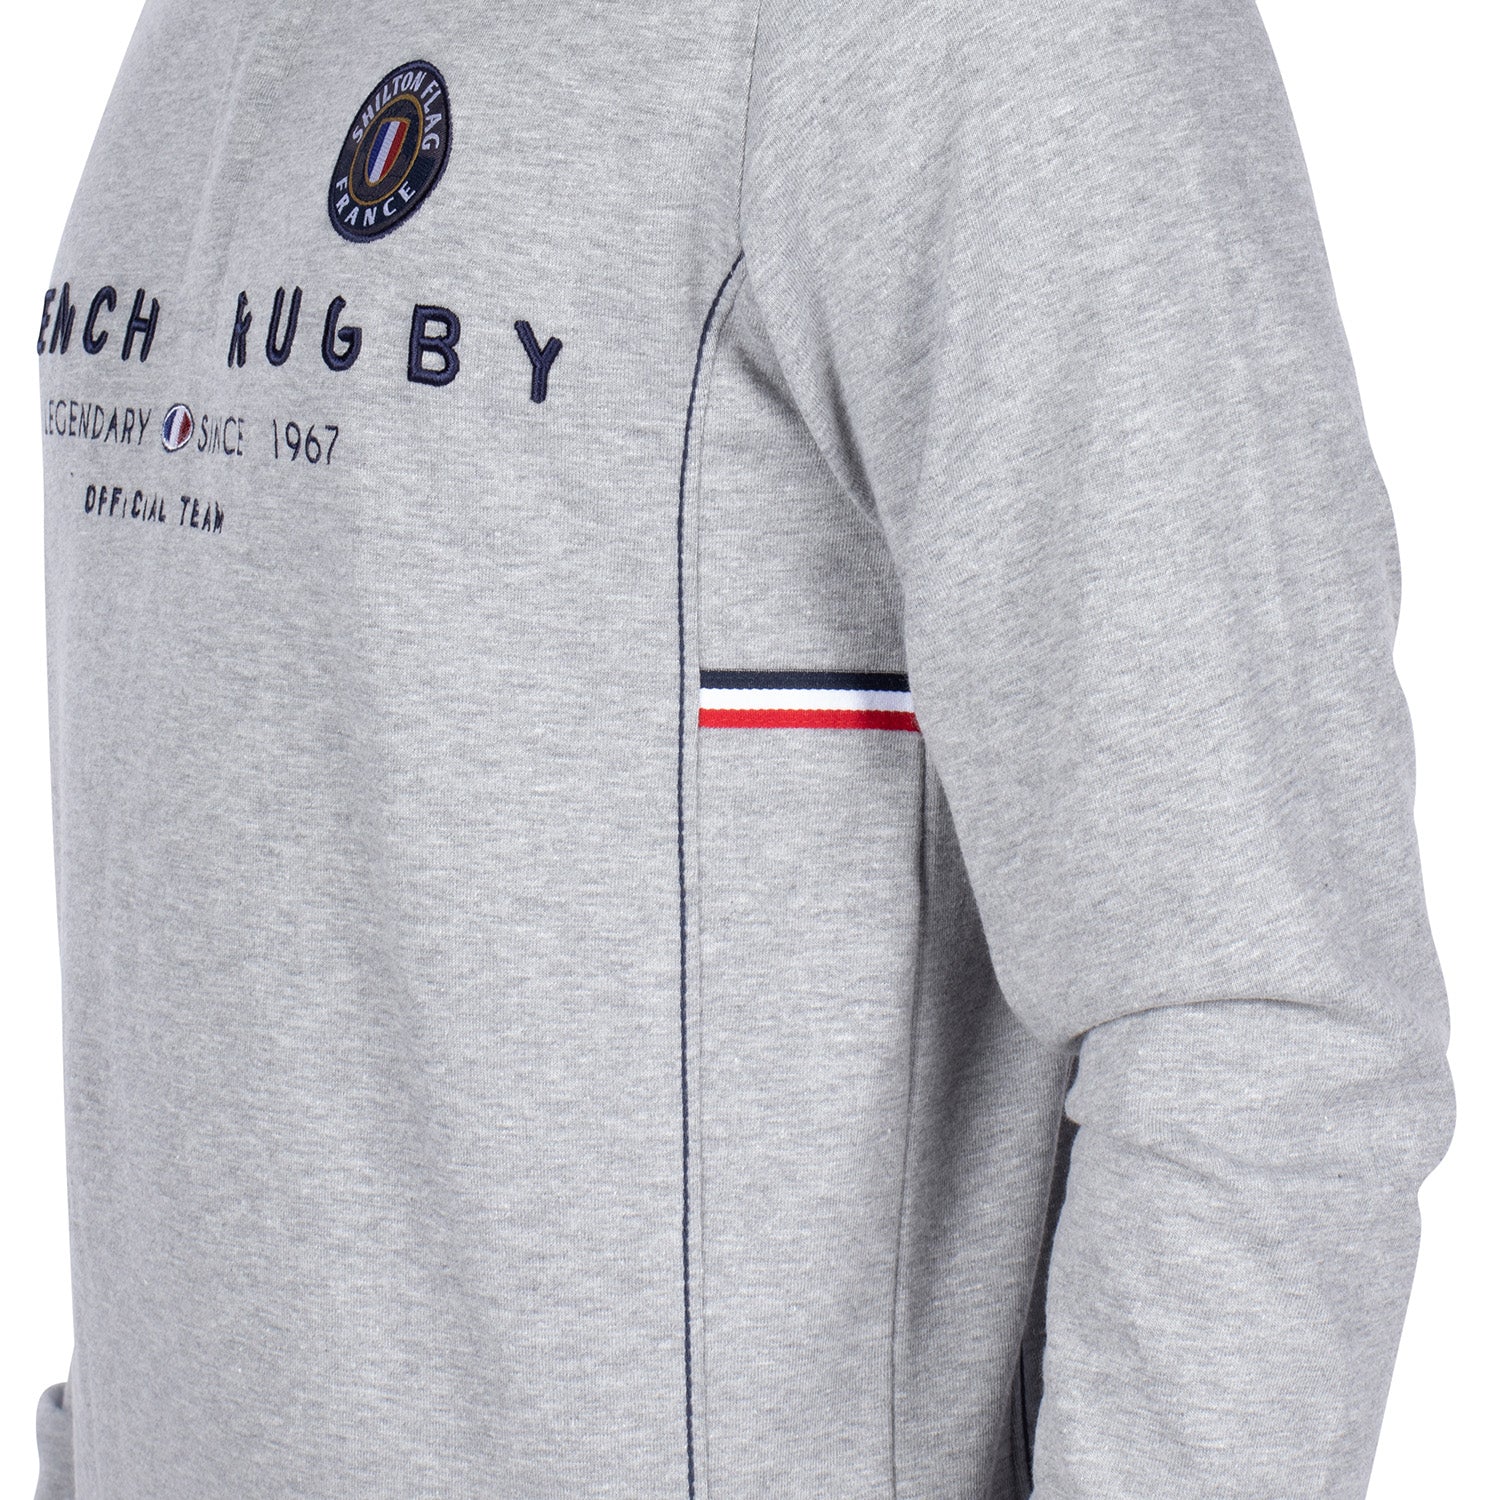 Polo French Rugby Ml Gris Chiné